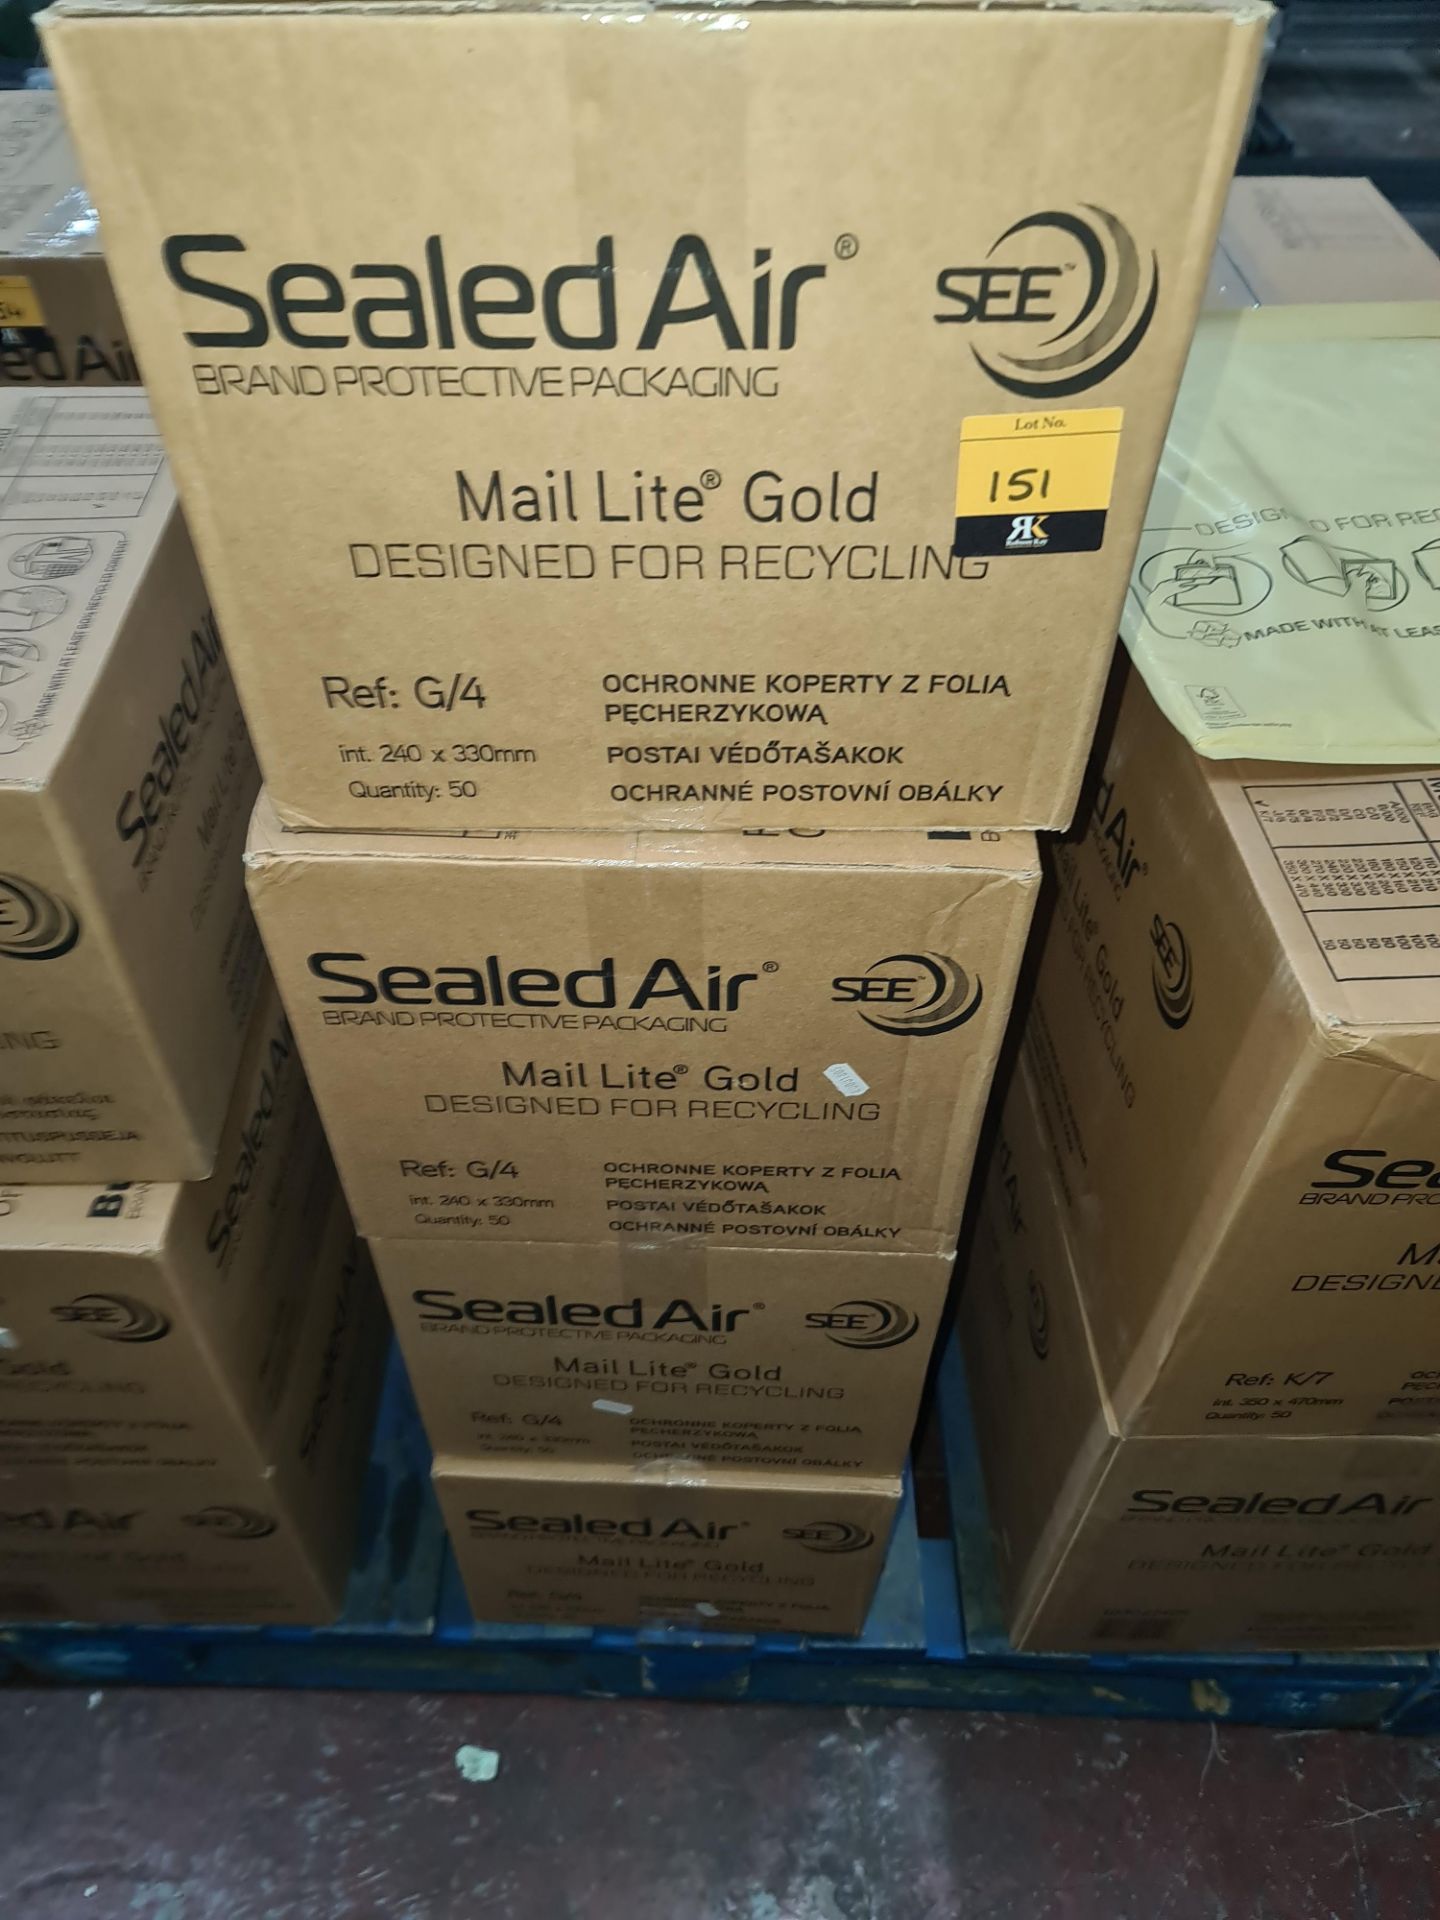 4 boxes of Sealed Air Mail Lite Gold G/4 padded envelopes - each box contains 50 envelopes which mea - Image 2 of 3